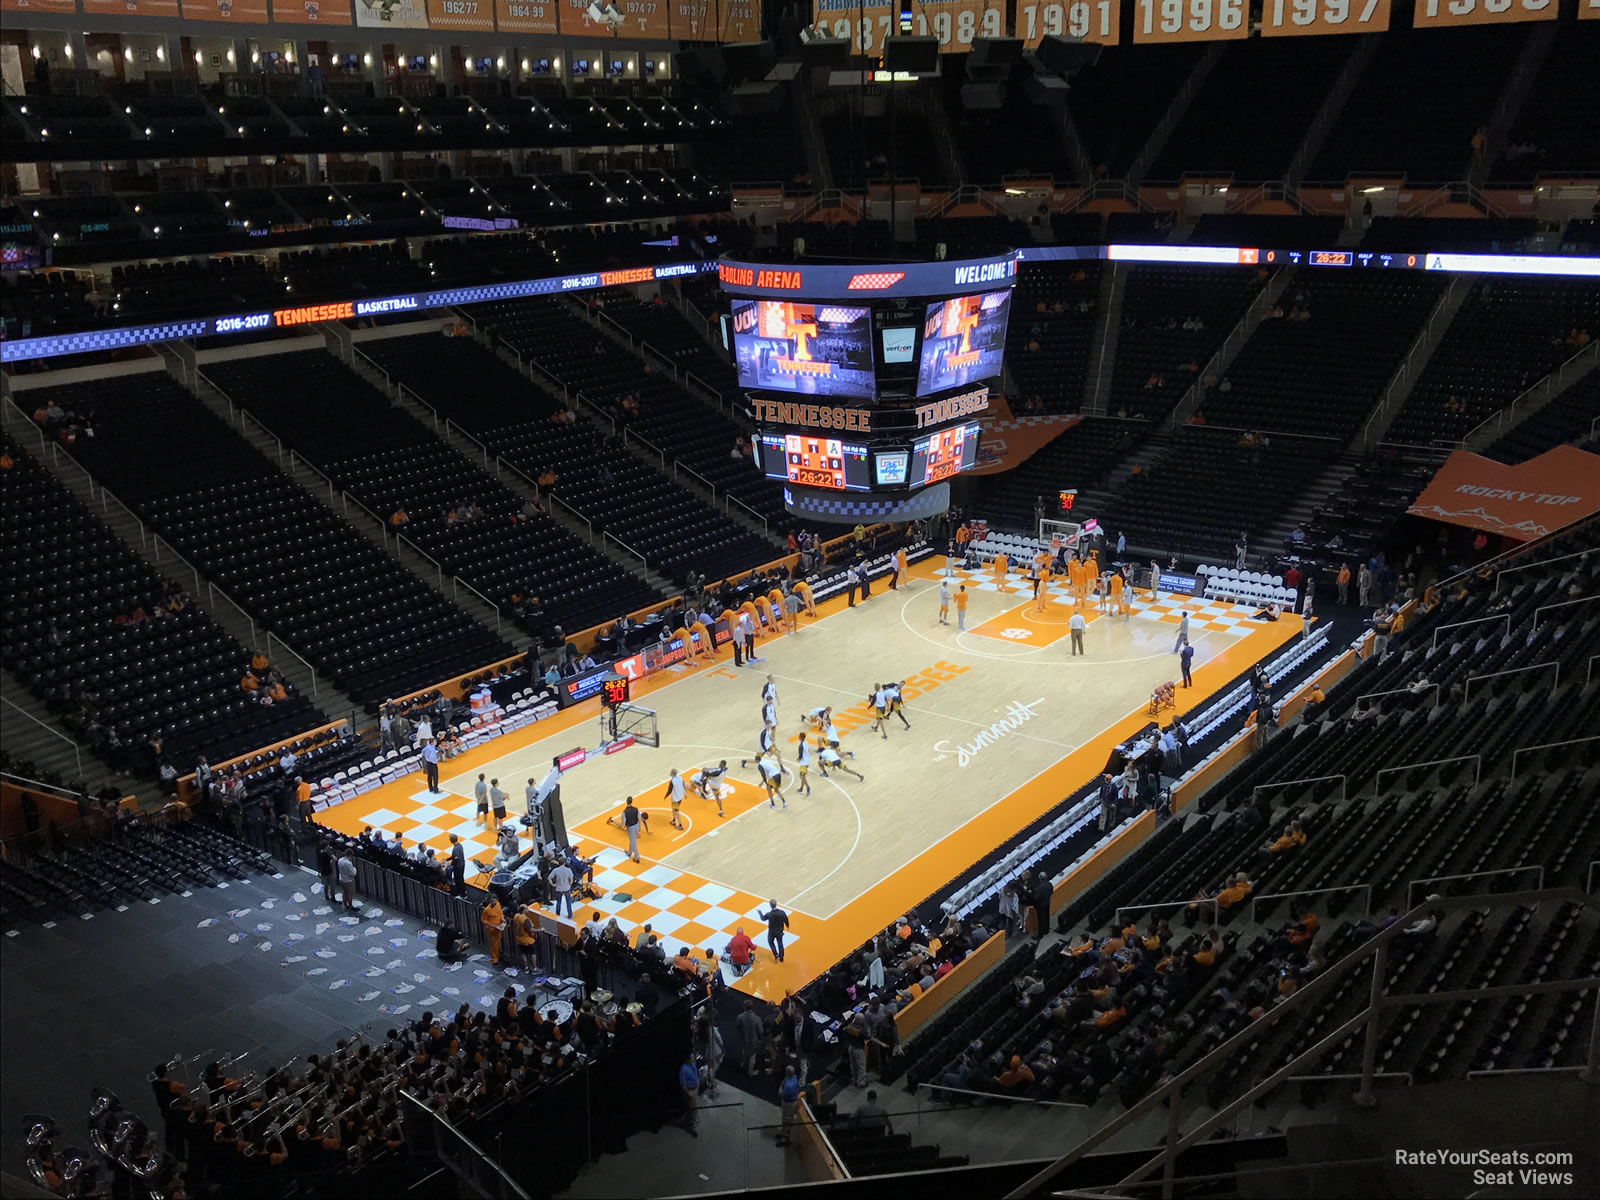 section 326, row 7 seat view  - thompson-boling arena